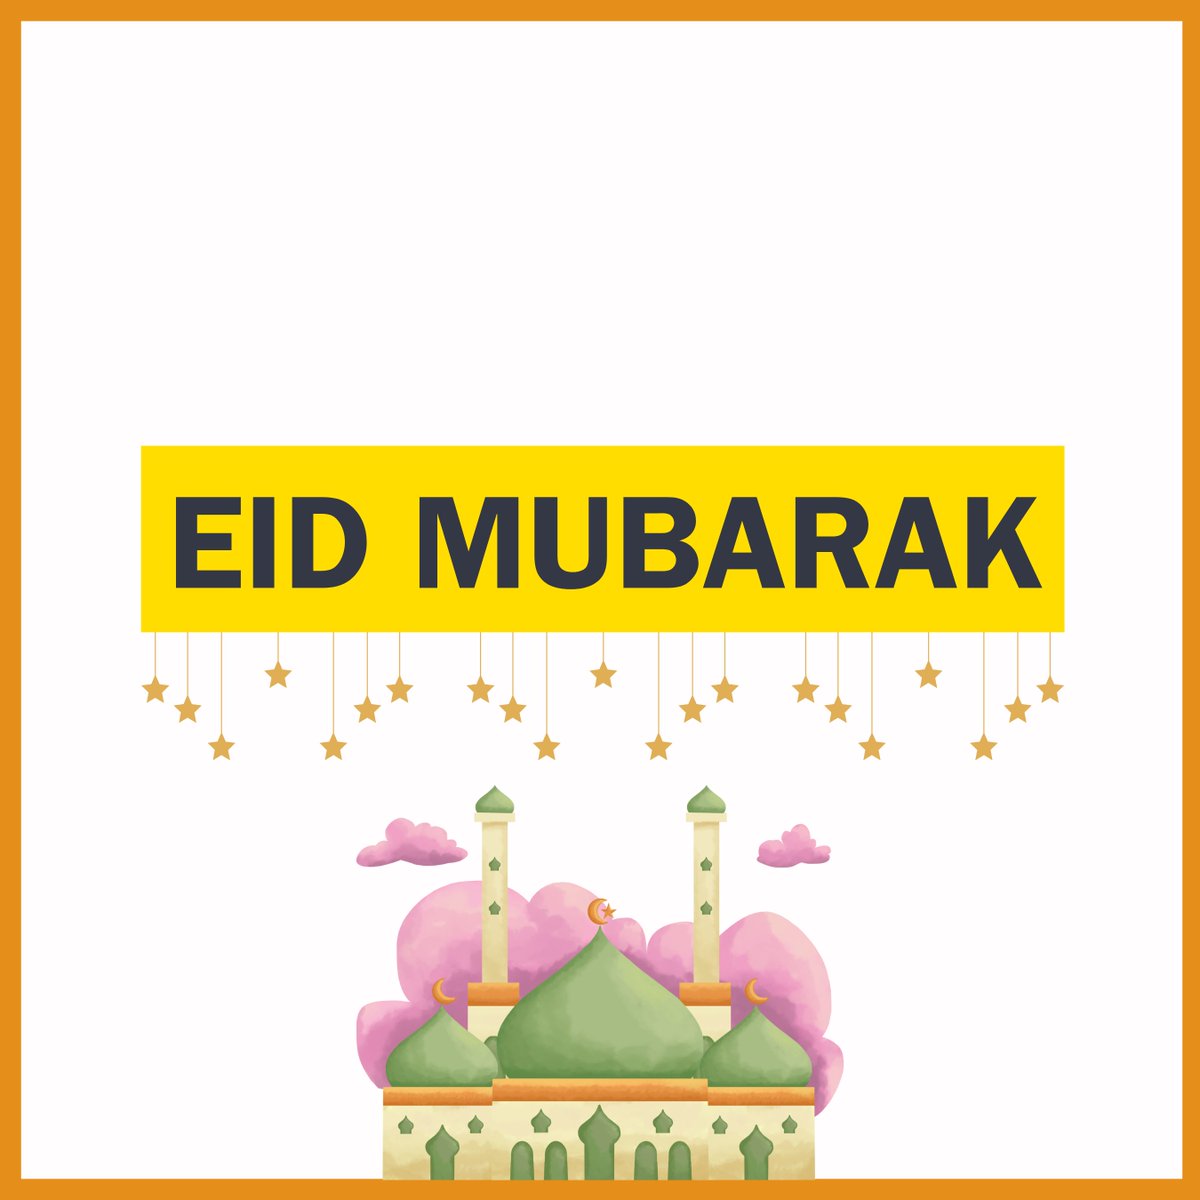 Eid Mubarak to all celebrating! May this special day bring joy, peace, and blessings to you and your loved ones. 🌙✨